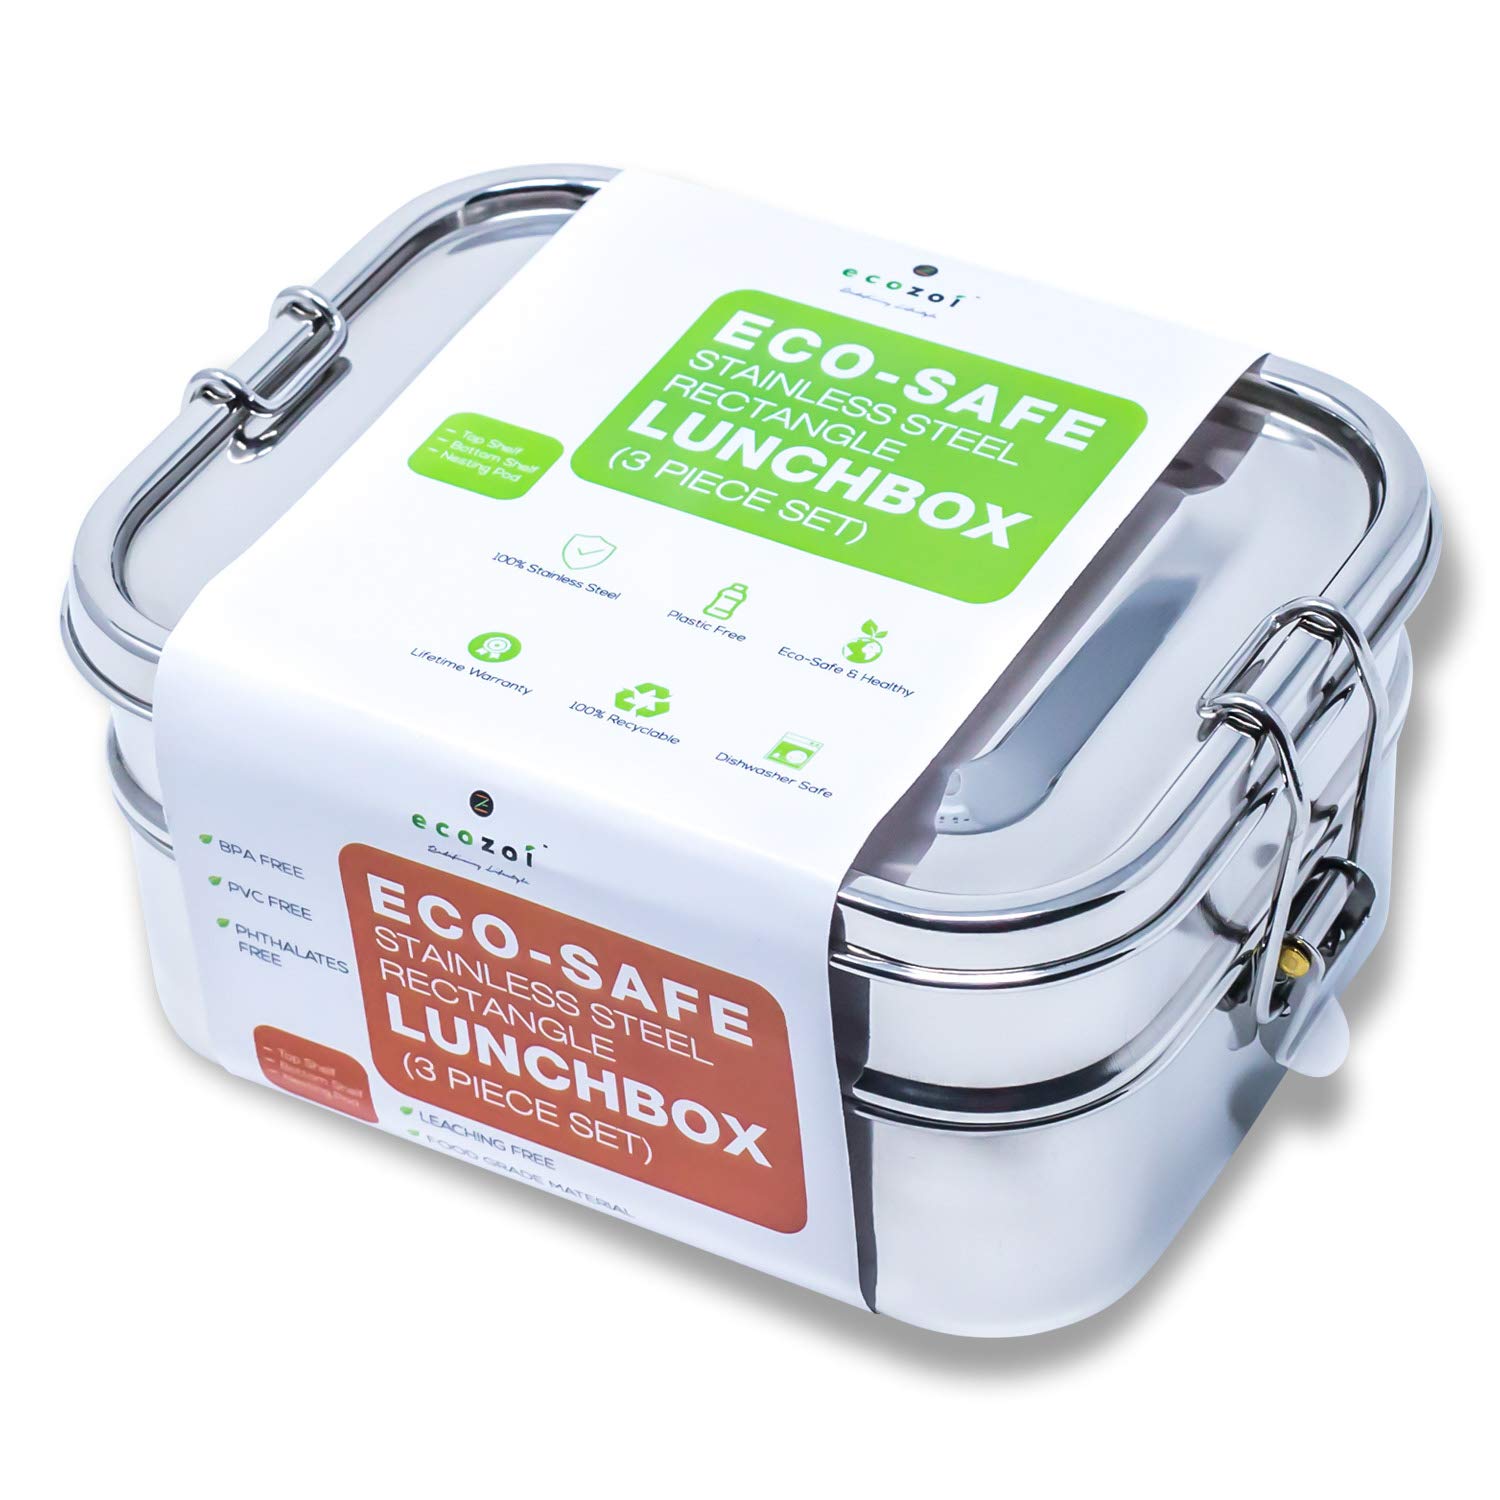 ecozoi Stainless Steel Lunch Box, 3-Tier Leak Proof Stackable Lunch Container Convertible to 1-Tier, With sauce Container and Silicone Band, Eco Friendly Bento Box Family Friendly (70 oz)